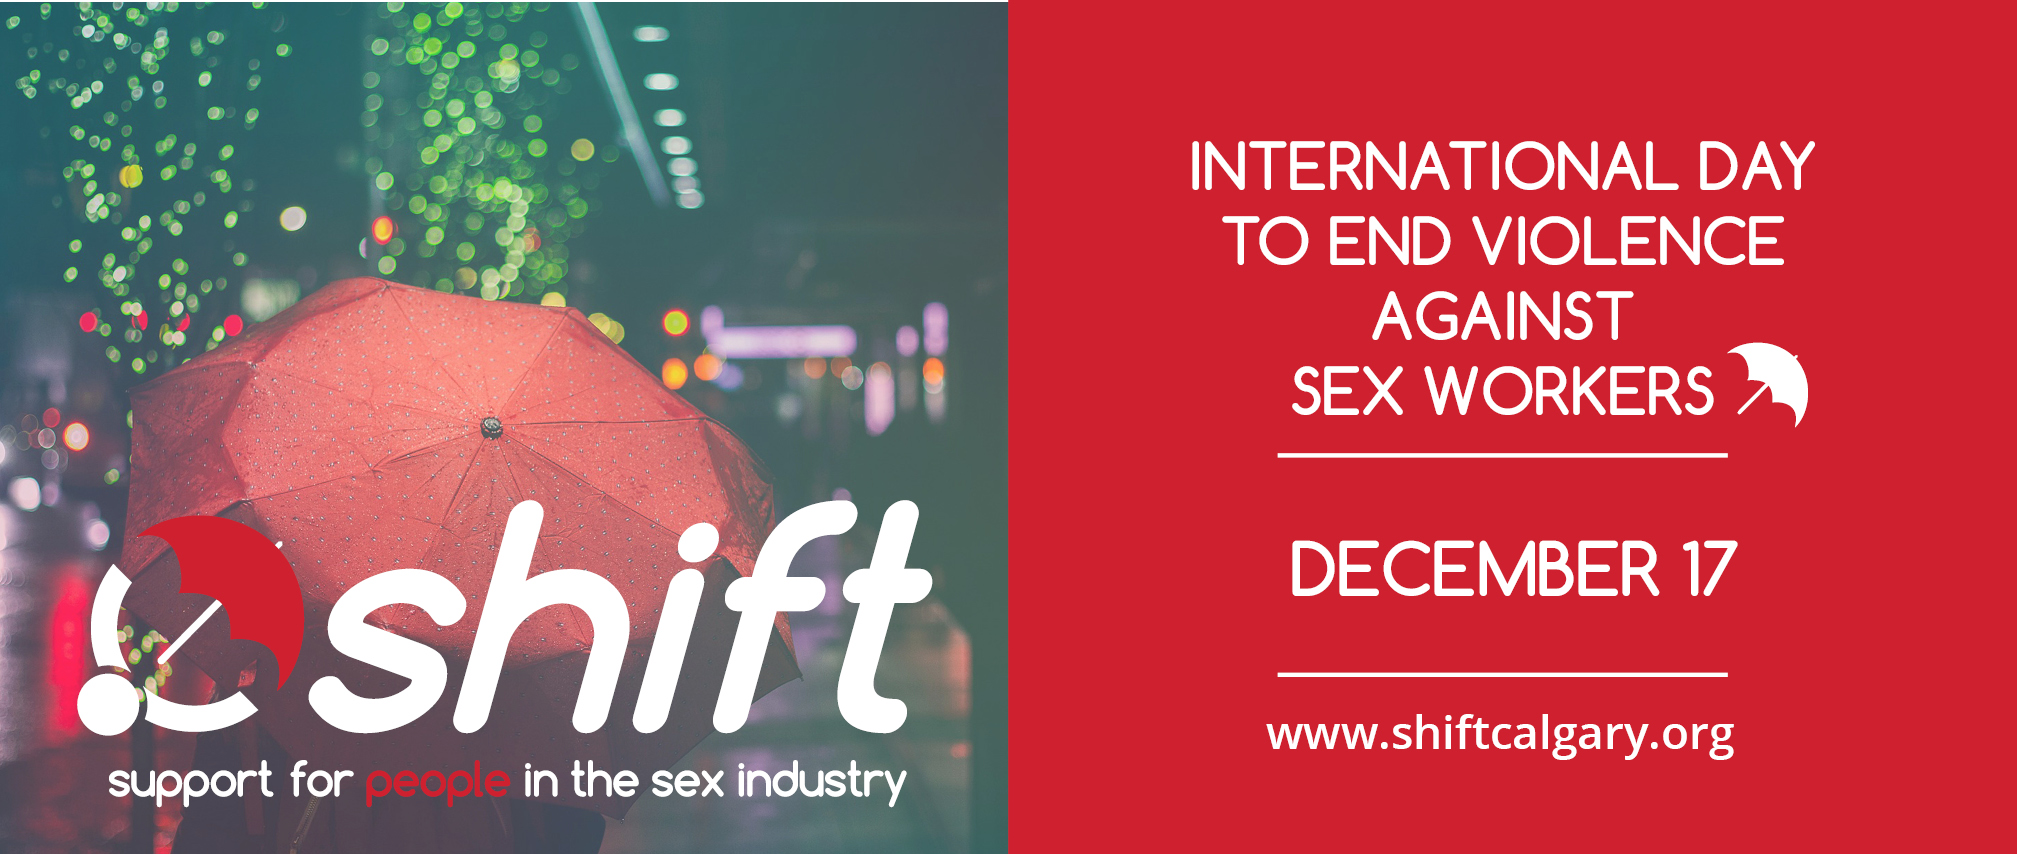 December 17th is International Day to End Violence Against Sex Workers. Stand Up for Their Human Rights!